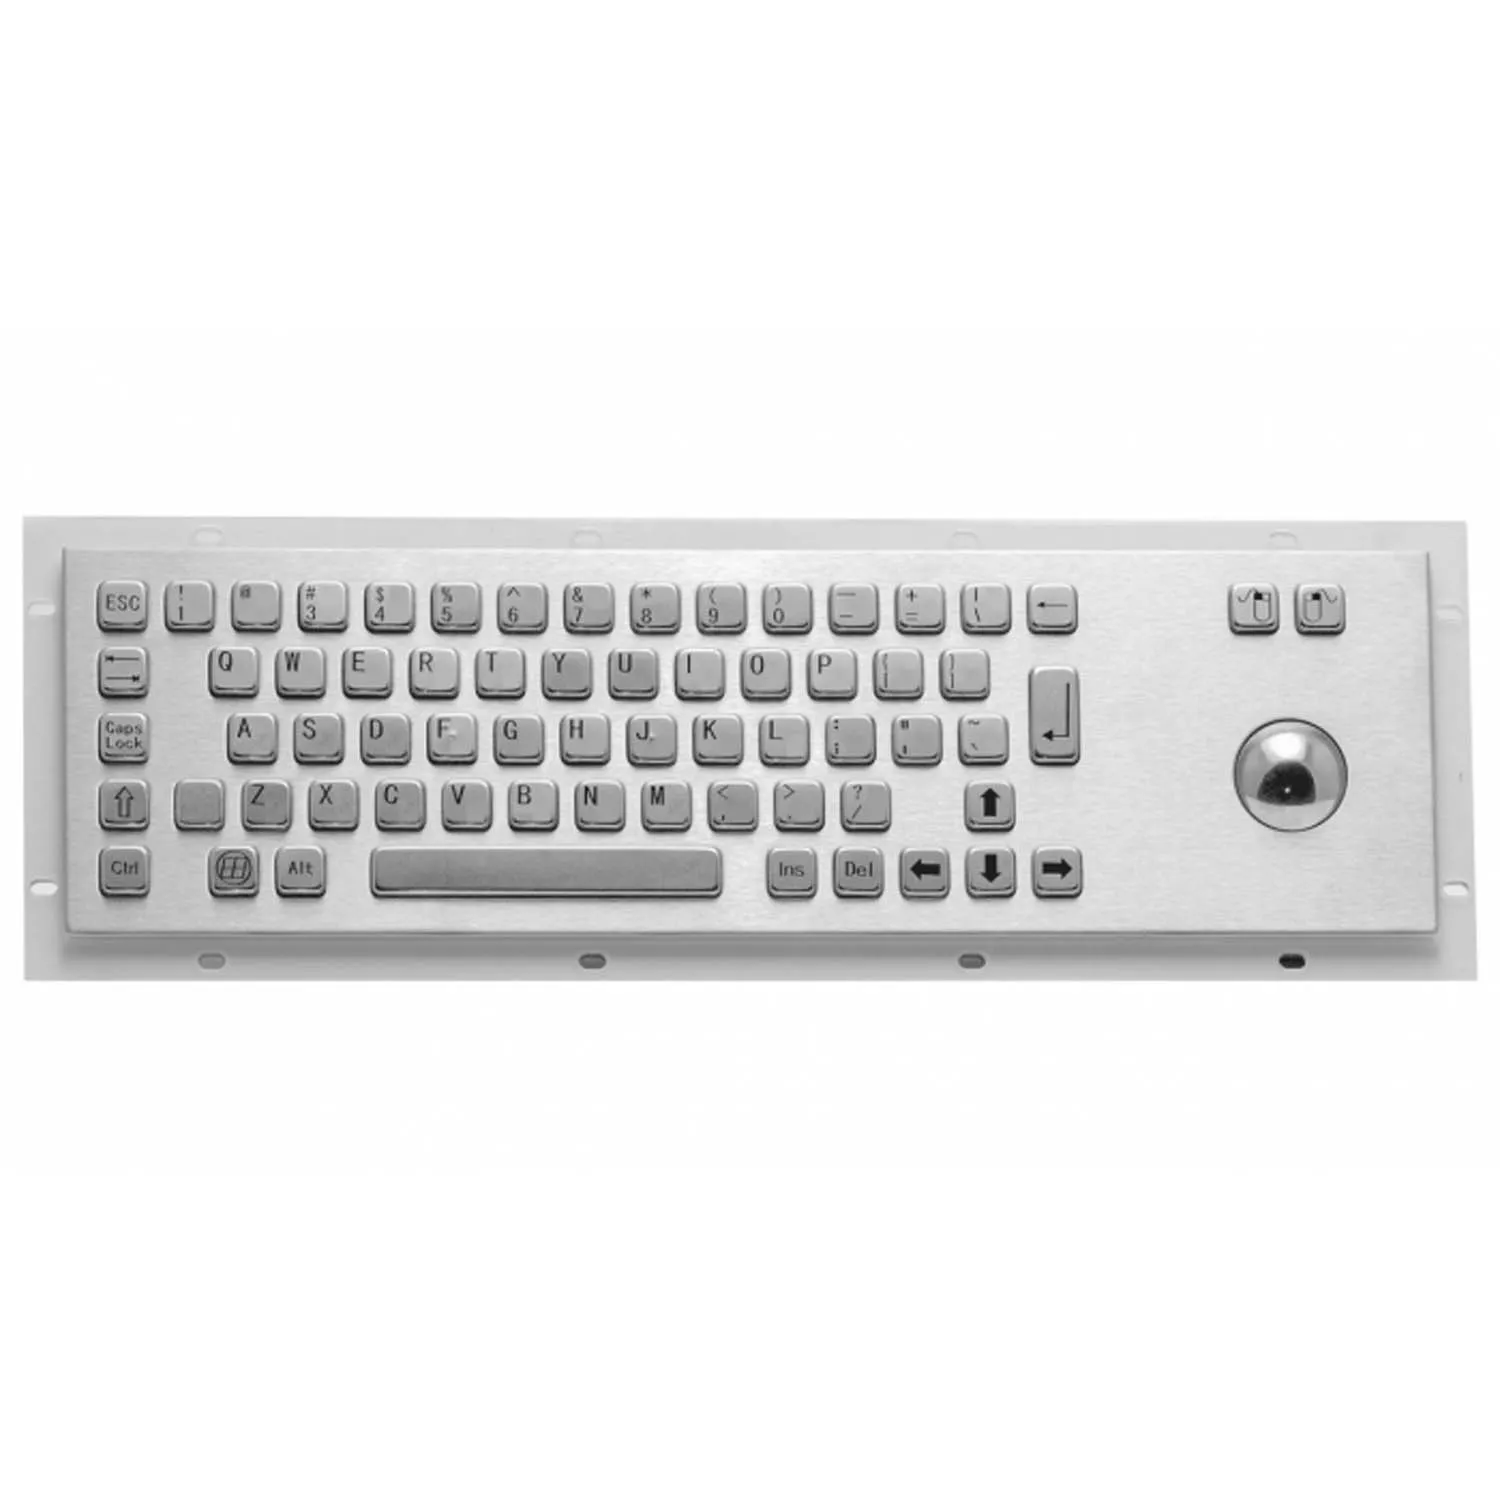 Rugged panel mount keyboard with trackball KB-000-NW0S0T3